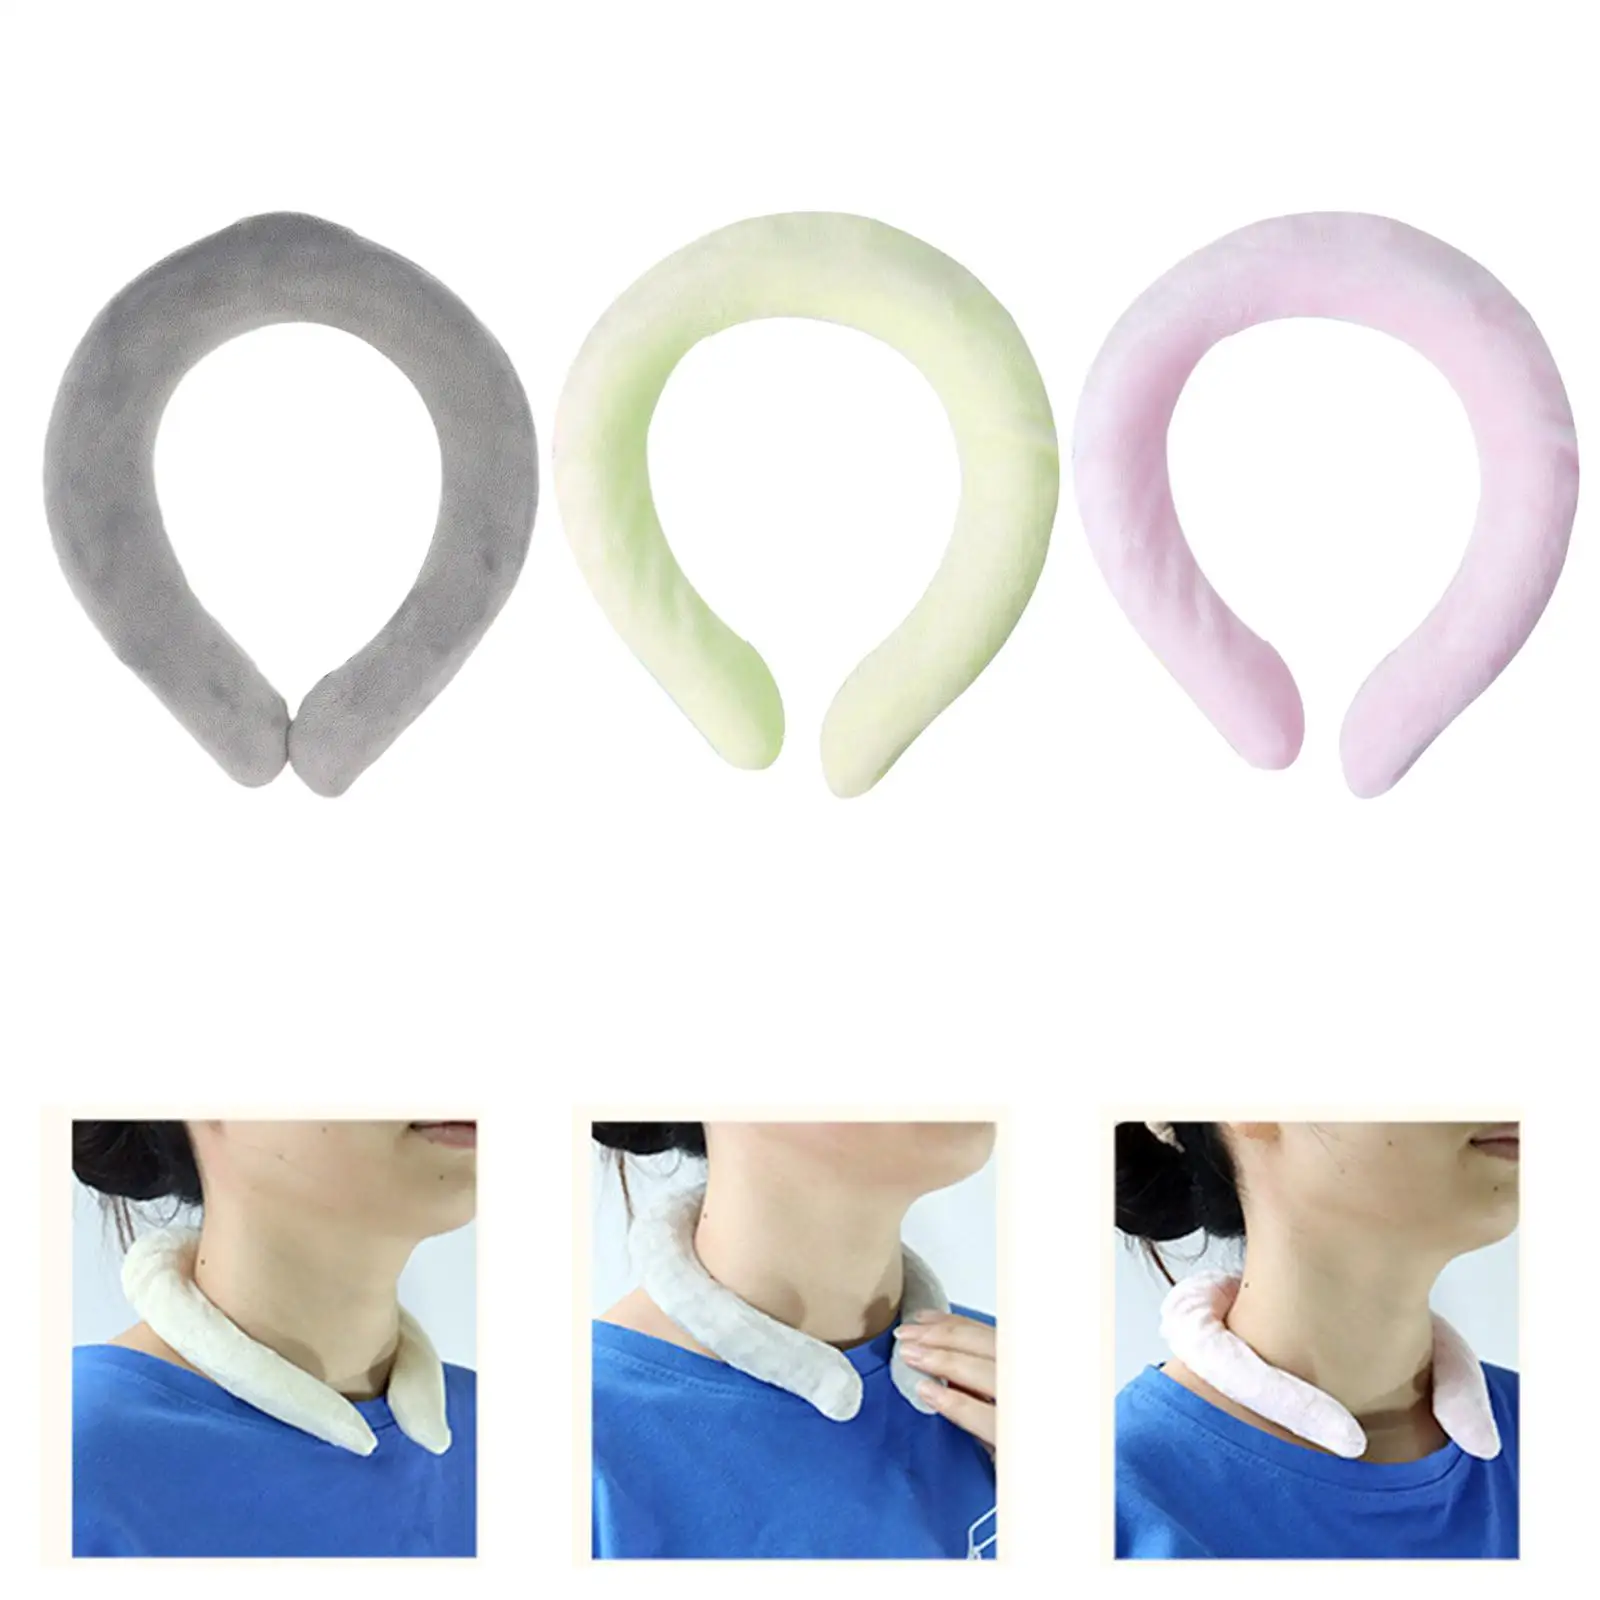 Neck Heat Ring Hot Pack Hands Free Wearable Heating Pad Microwavable Reusable for Cold Weather Neck Warmer Neck Heating Tube